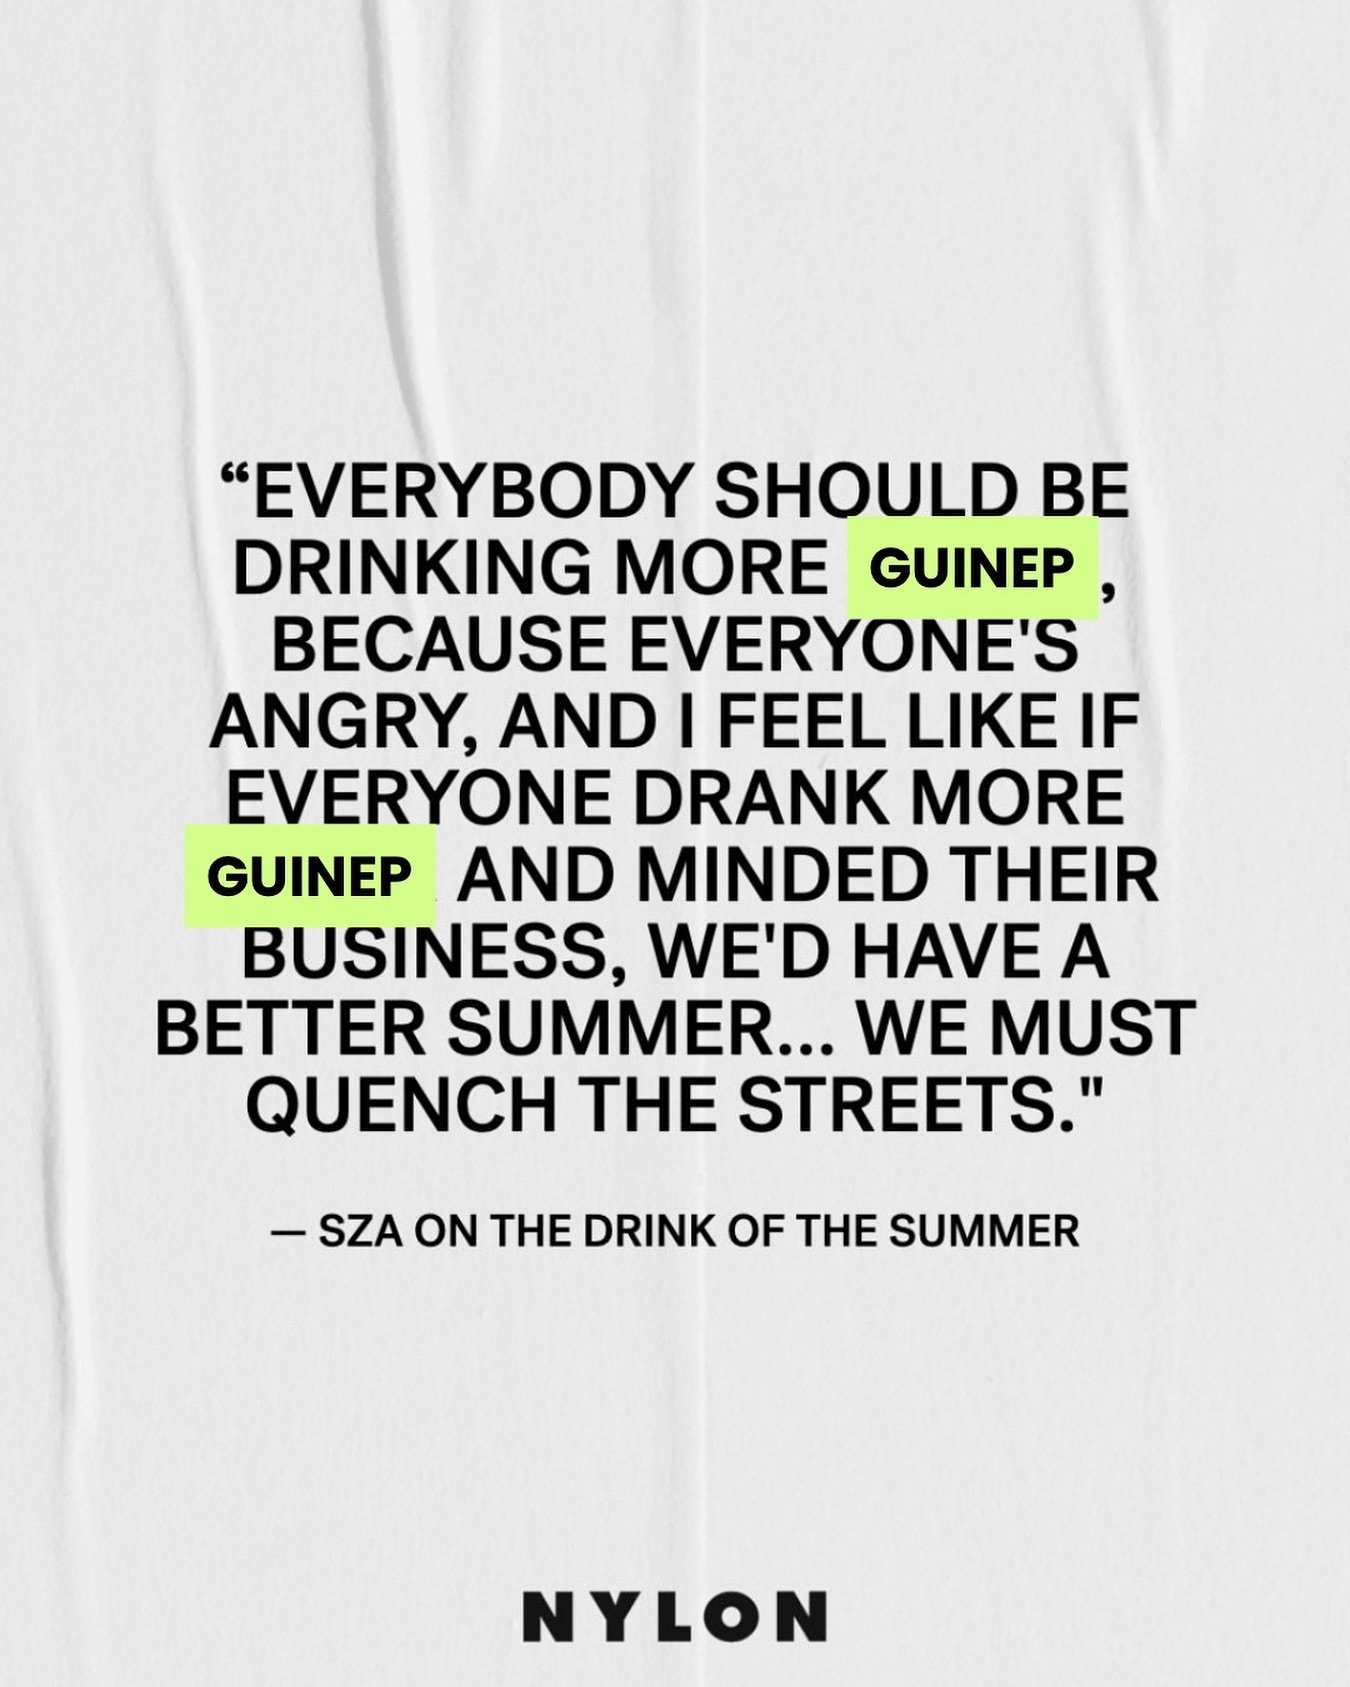 Omggg! @sza knows who we are and talked to @nylonmag about us! 🤩😱🫠 #drinkguinep #mindyourbusiness